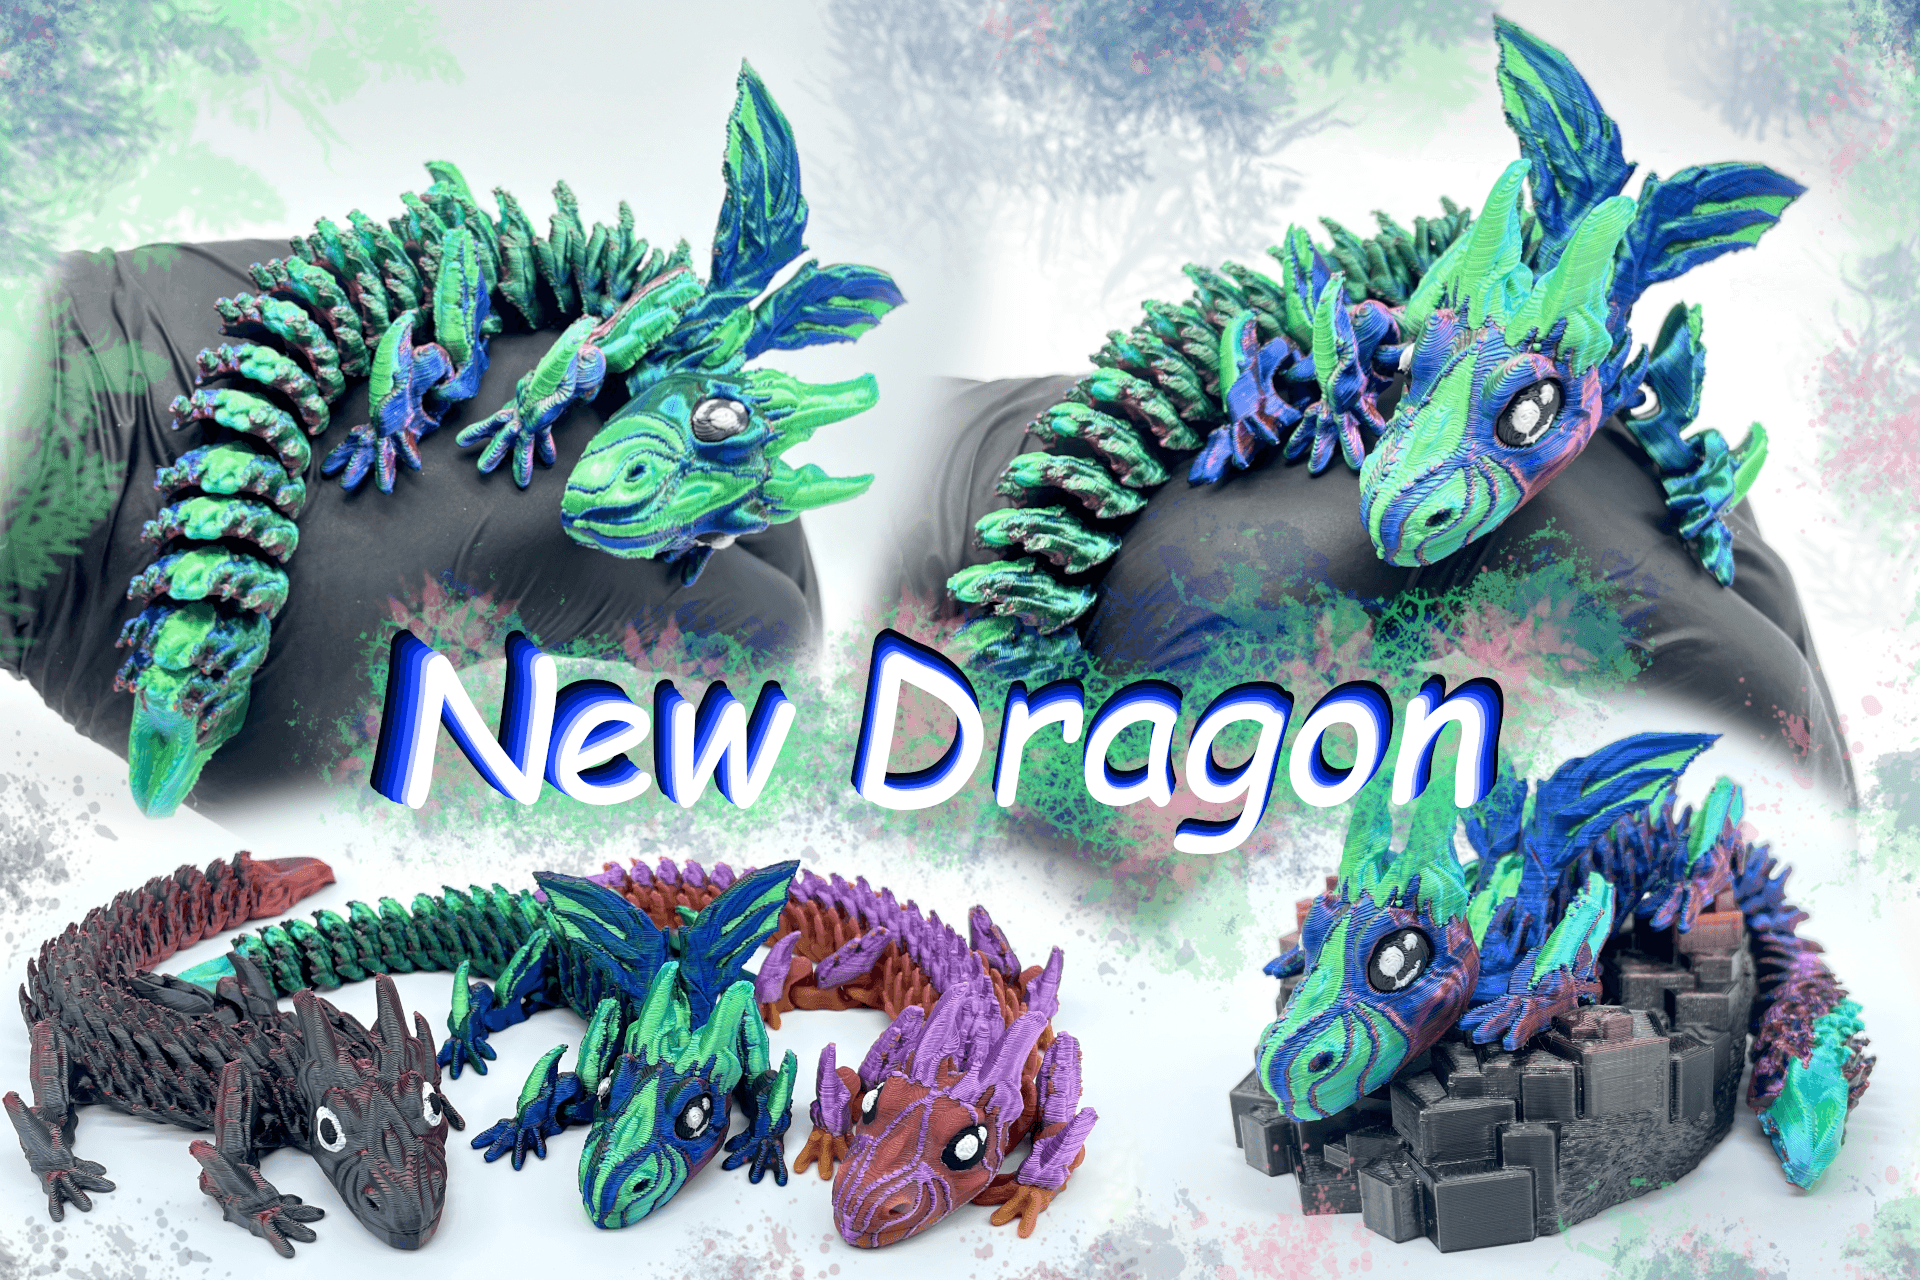 Majestic Baby Dragon now available!